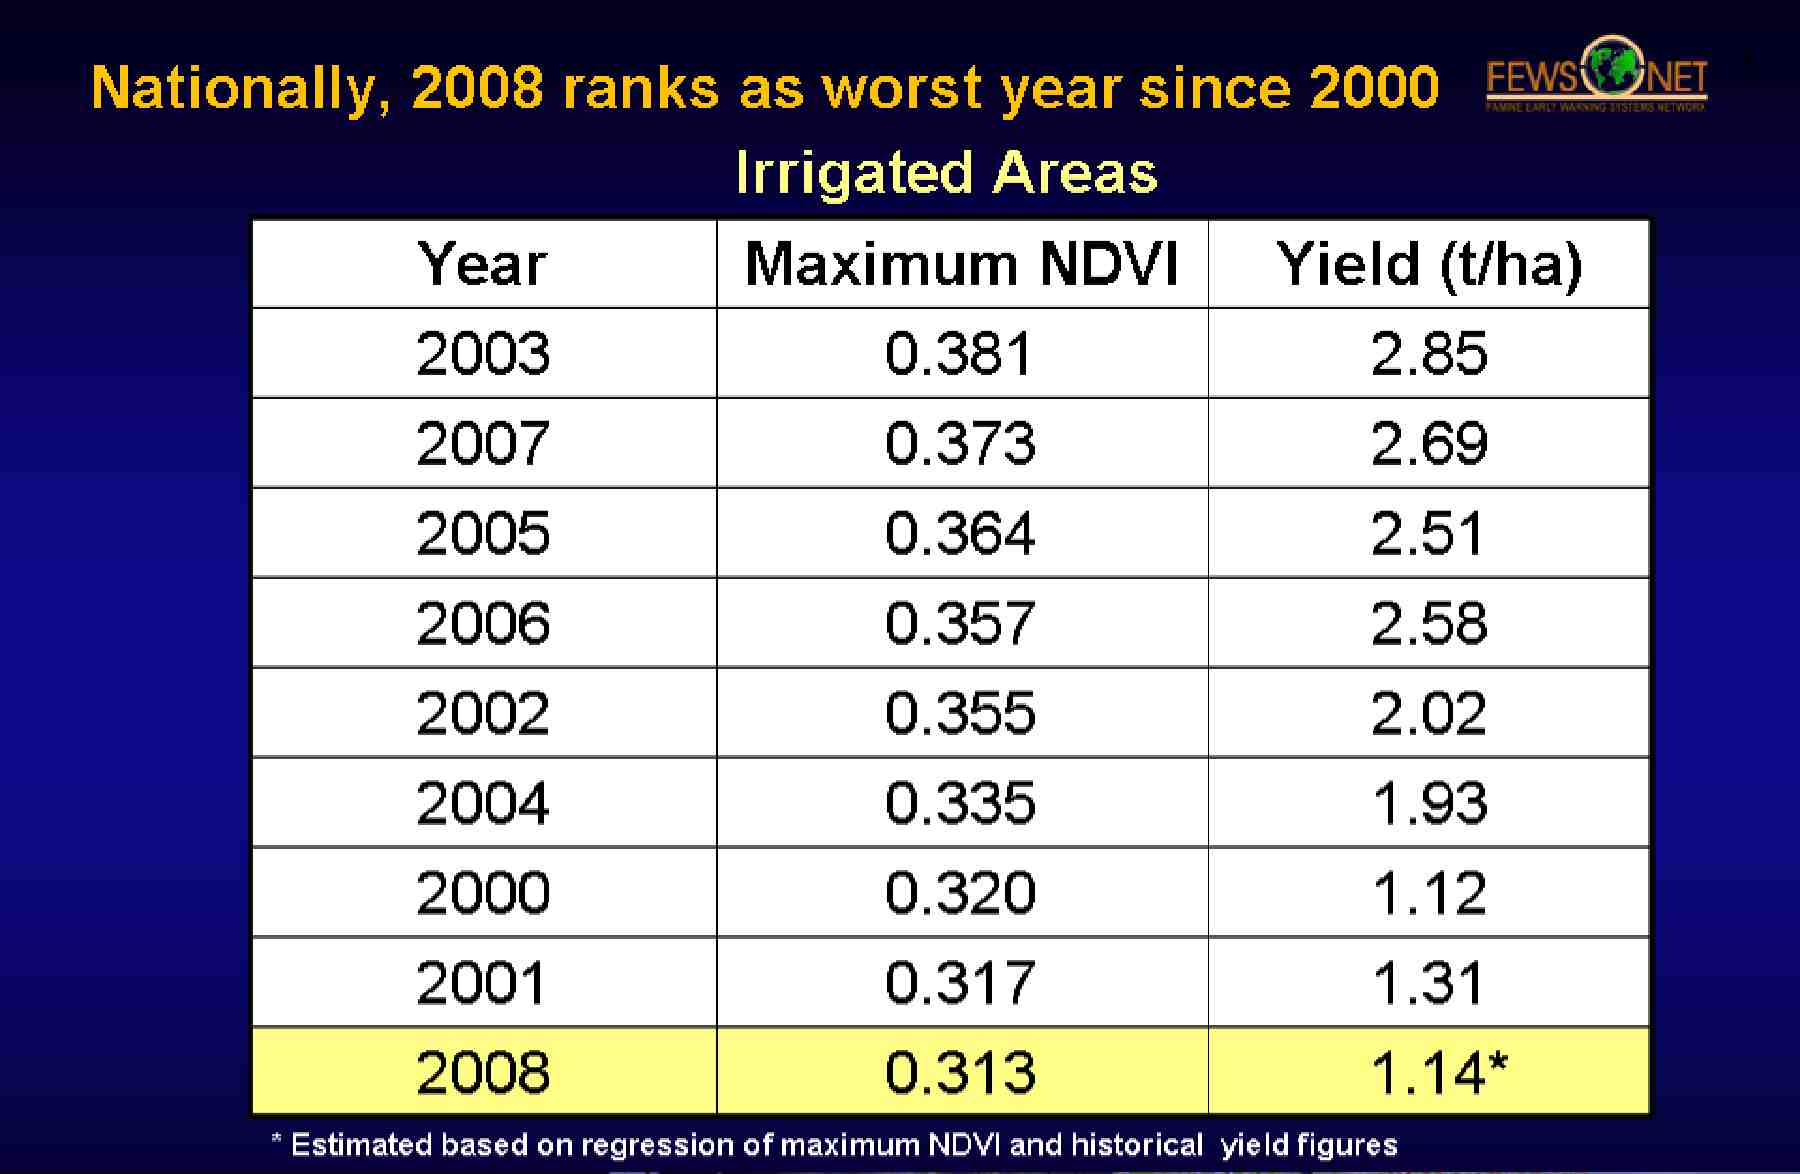 Figure 3. Annual maximum NDVI and CFSAM yield figures ranked from best to worst for irrigated areas of Afghanistan. The 2008 maximum NDVI ranks worst in the series. The yield estimate for 2008 is based on the regression of maximum NDVI and historical yield figures.